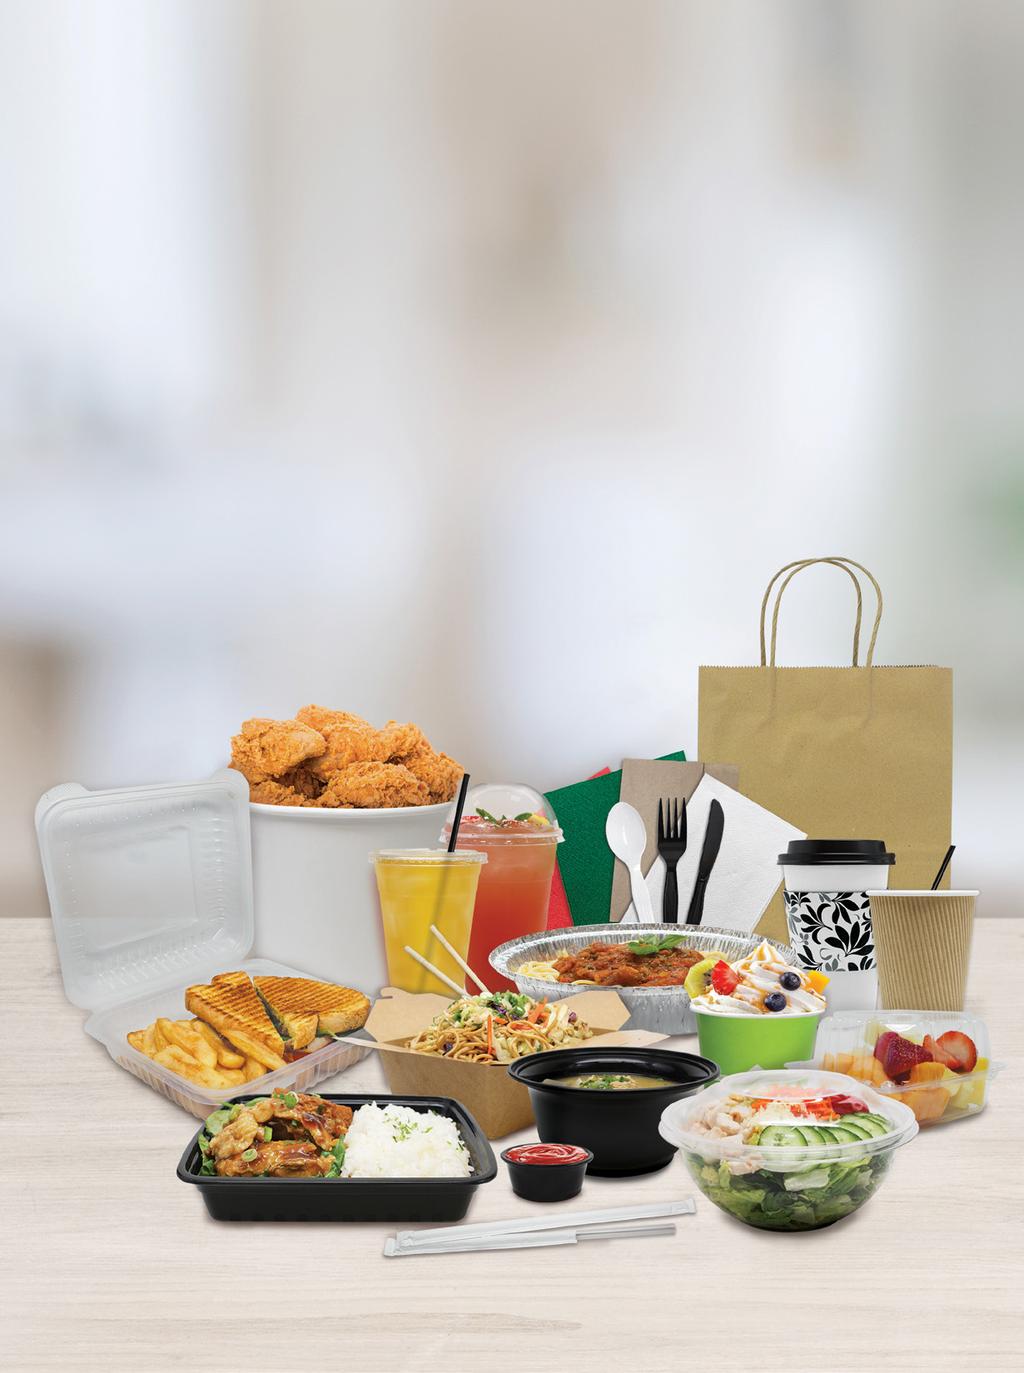 Premium Disposable Paper & Plastic Food Service Products 6 PolyPro/PP Cold Cups & Lids 18 Plastic Hinged Containers 25 Catering Supplies 8 PET Cold Cups & Lids 18 PET Salad Bowls & Lids 26 Napkins 9